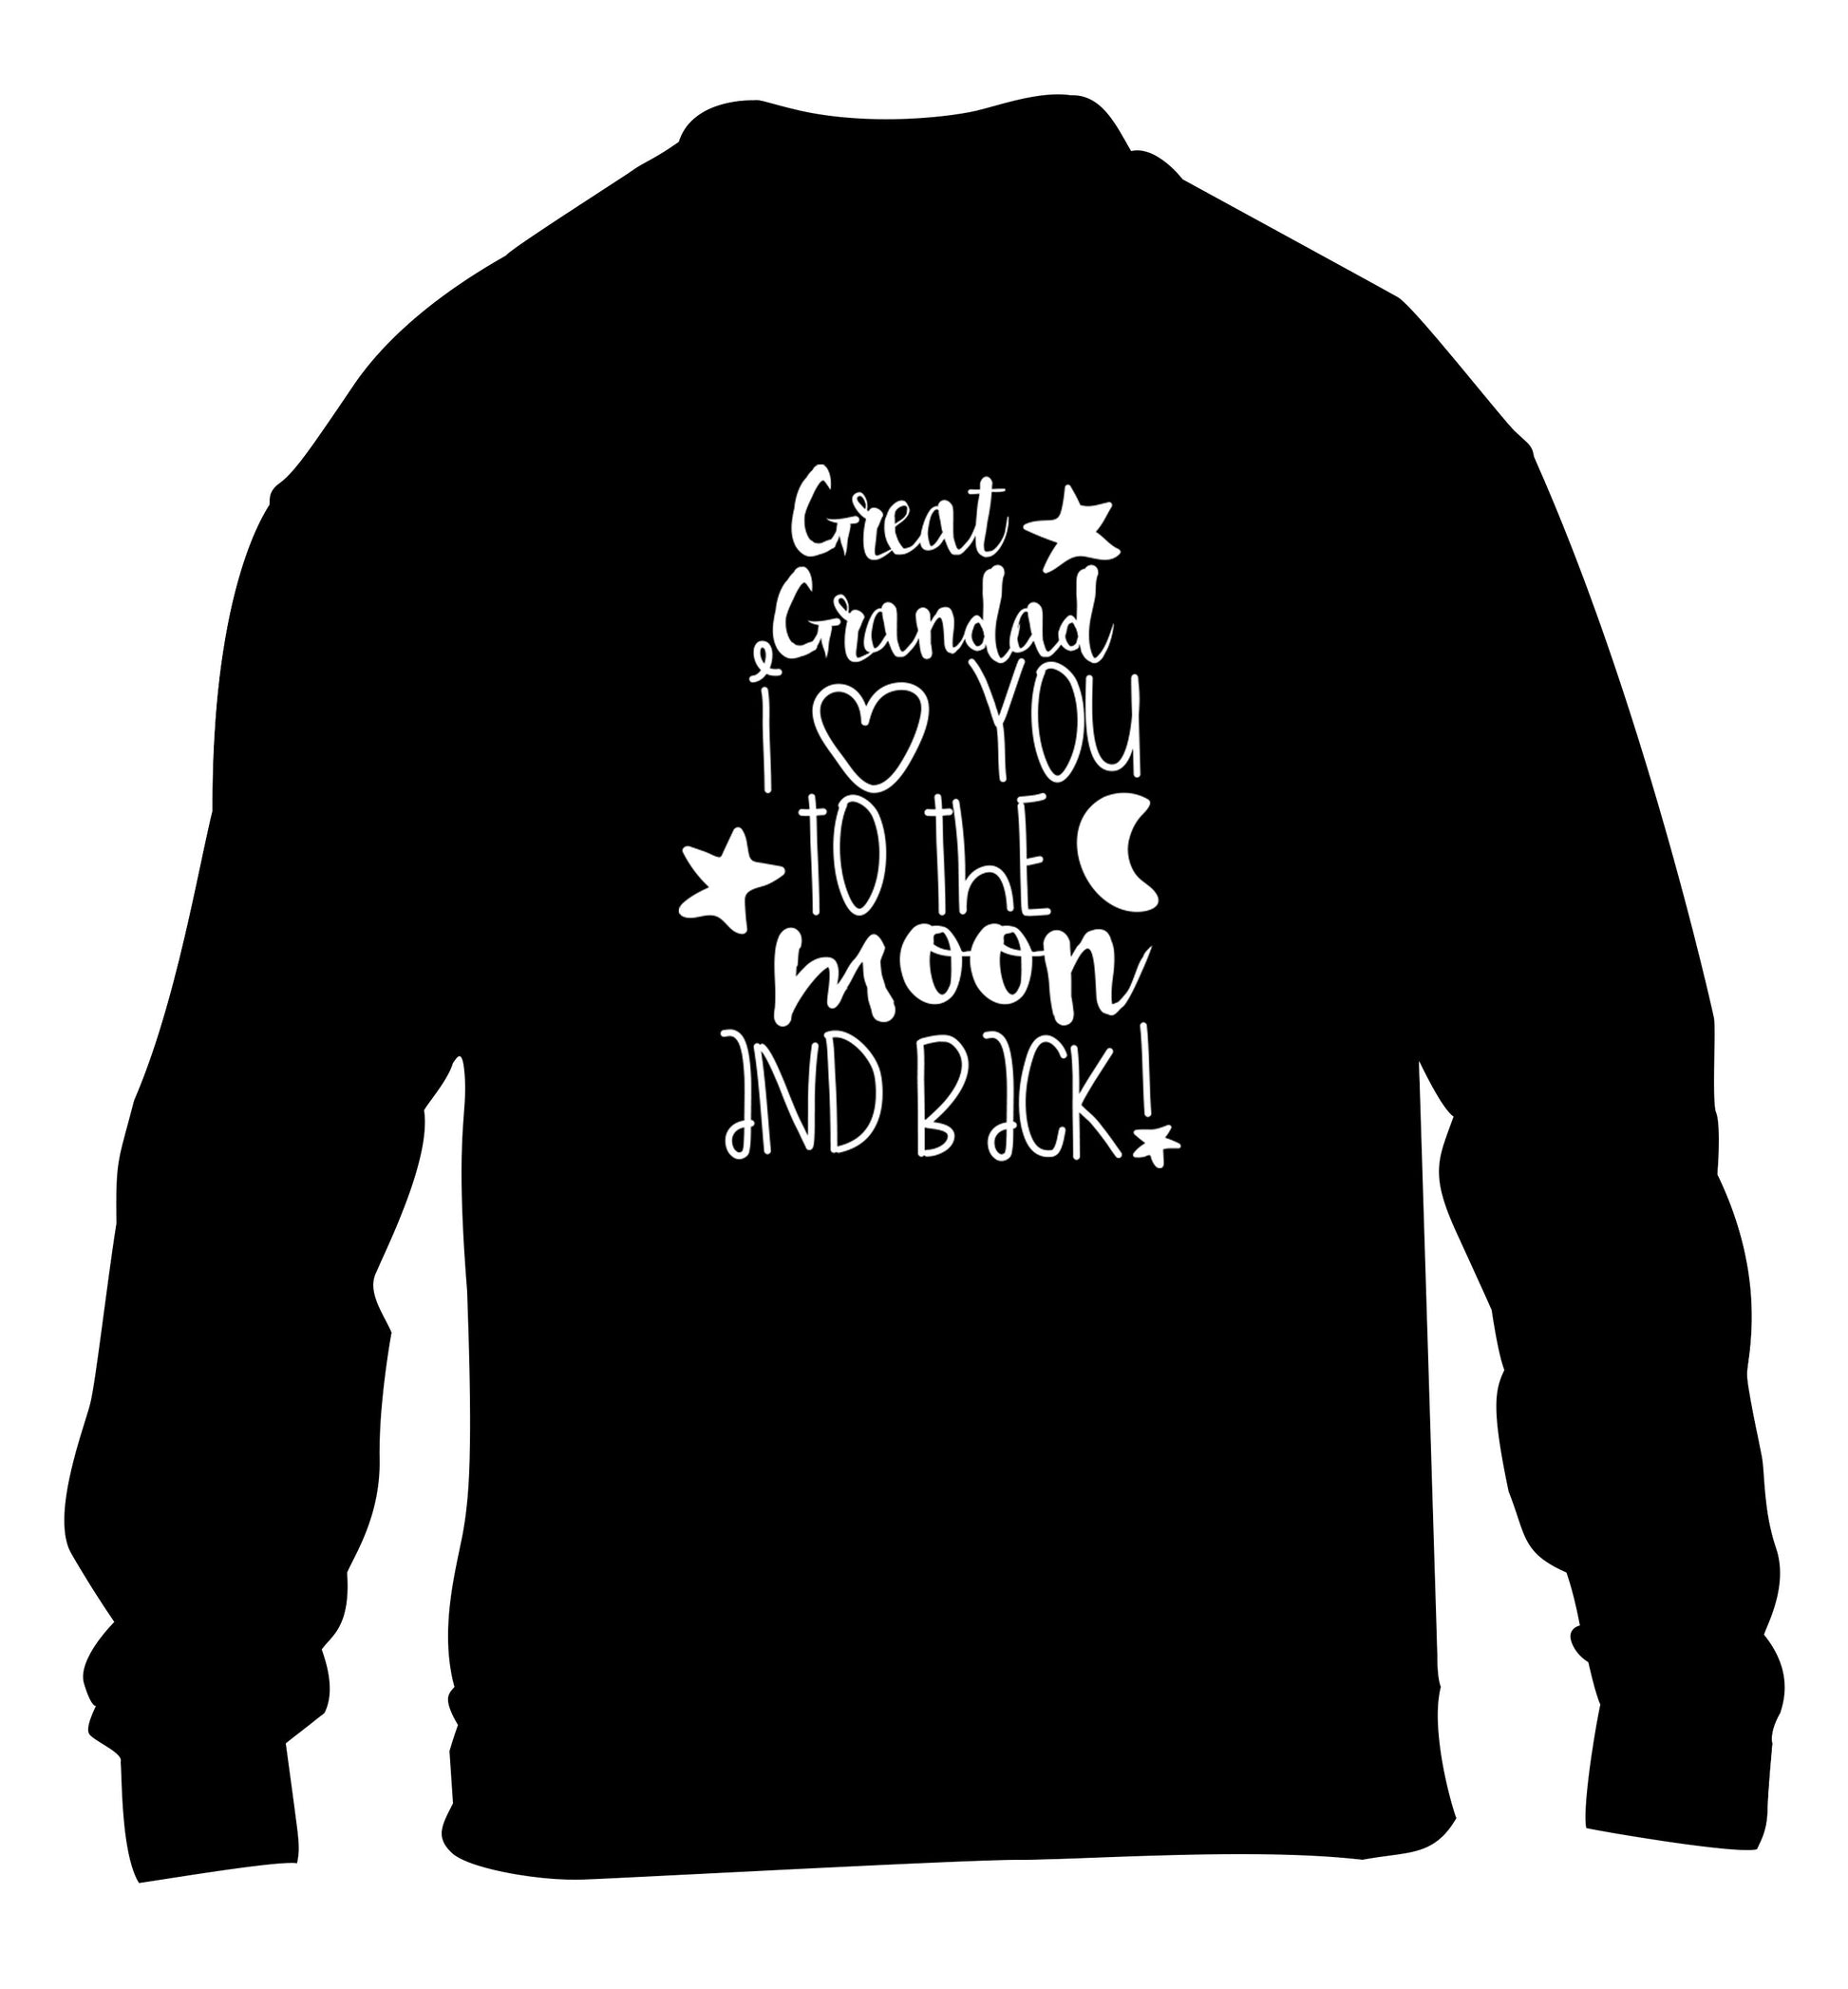 Great Grandad I love you to the moon and back children's black  sweater 12-14 Years